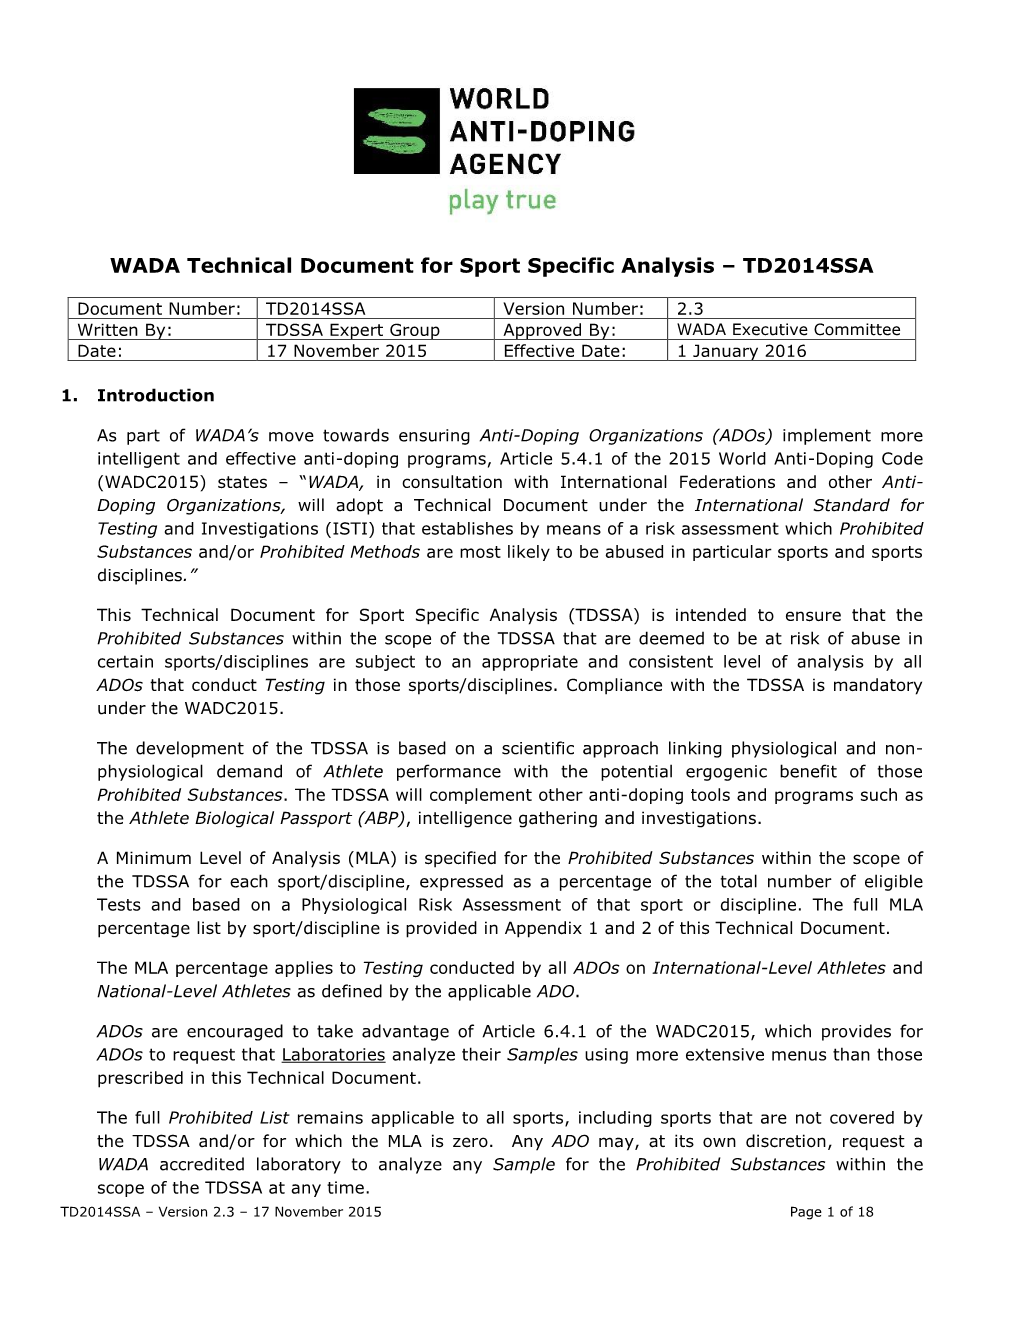 WADA Technical Document for Sport Specific Analysis – TD2014SSA